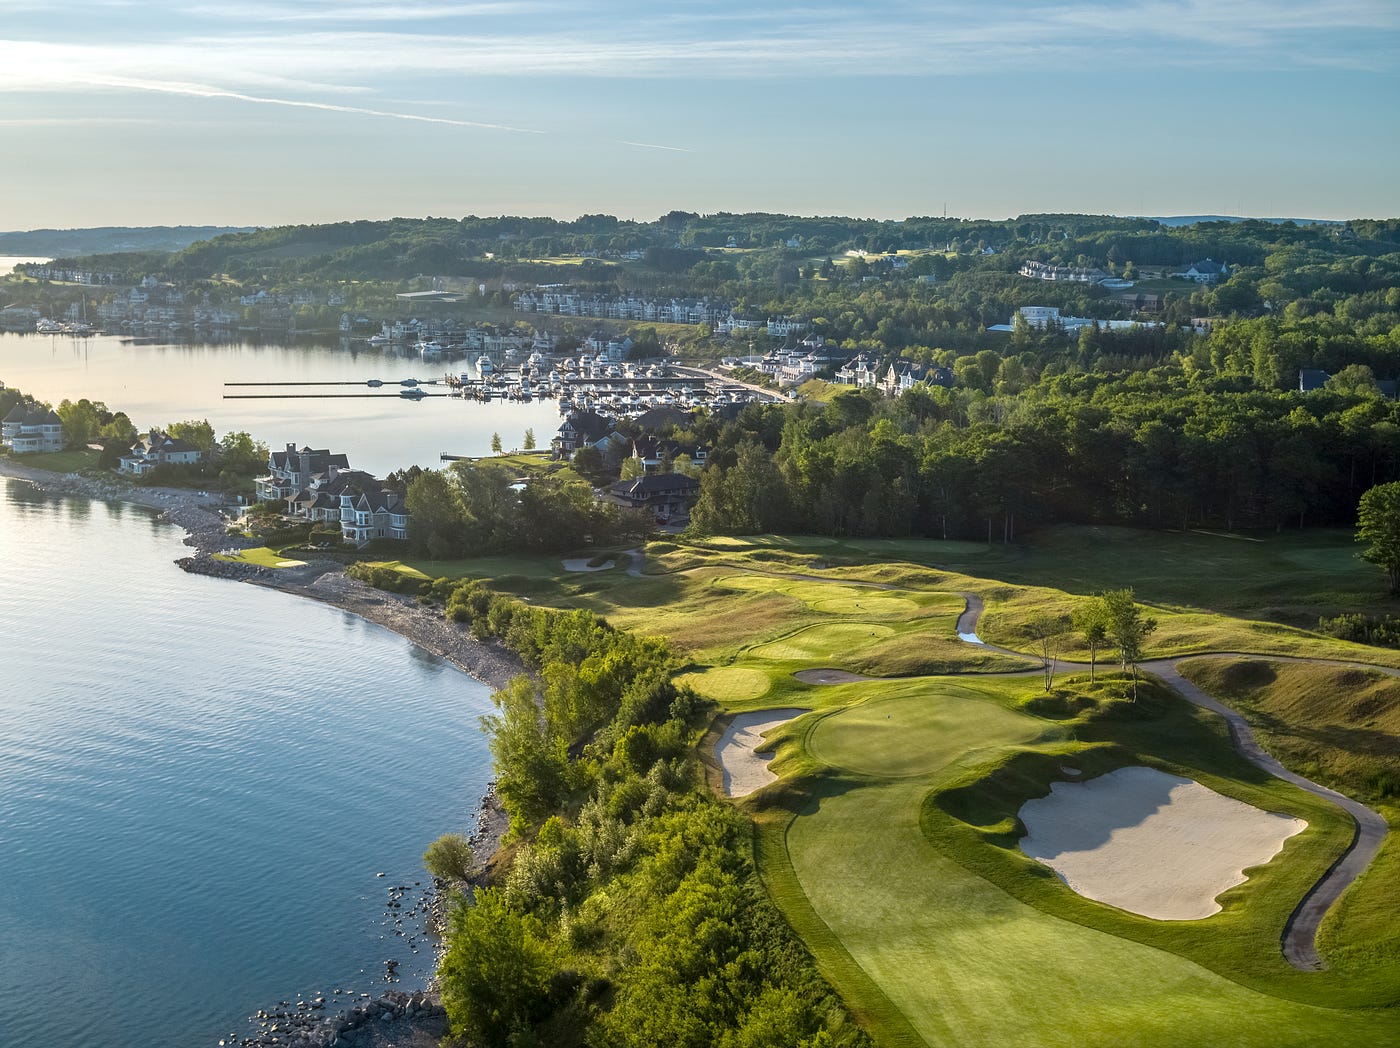 TRAVEL: BOYNE Golf Announces Two New Vacation Packages